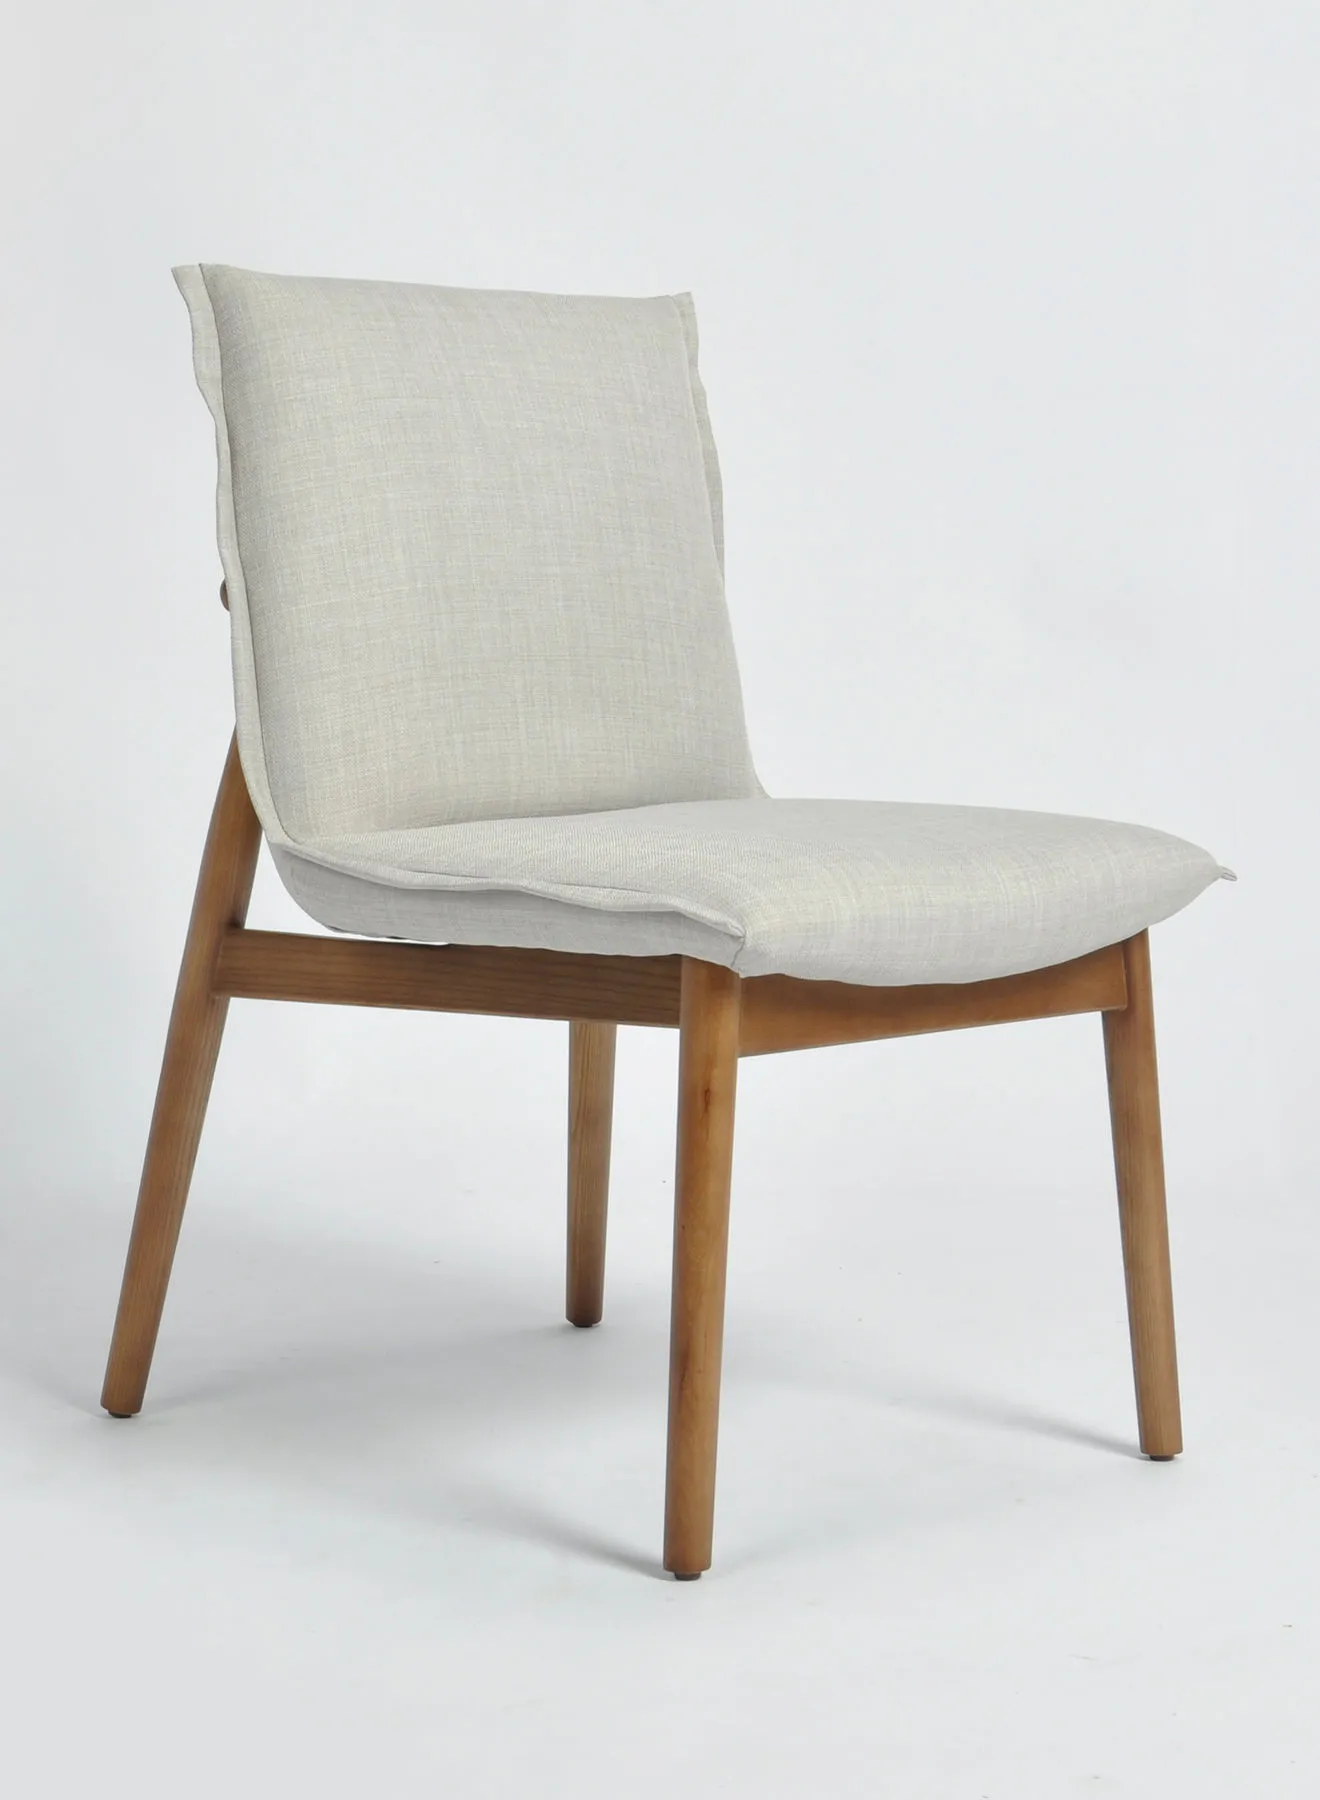 Switch Dining Chair In Grey Wooden Chair Size 61 X 56 X 82